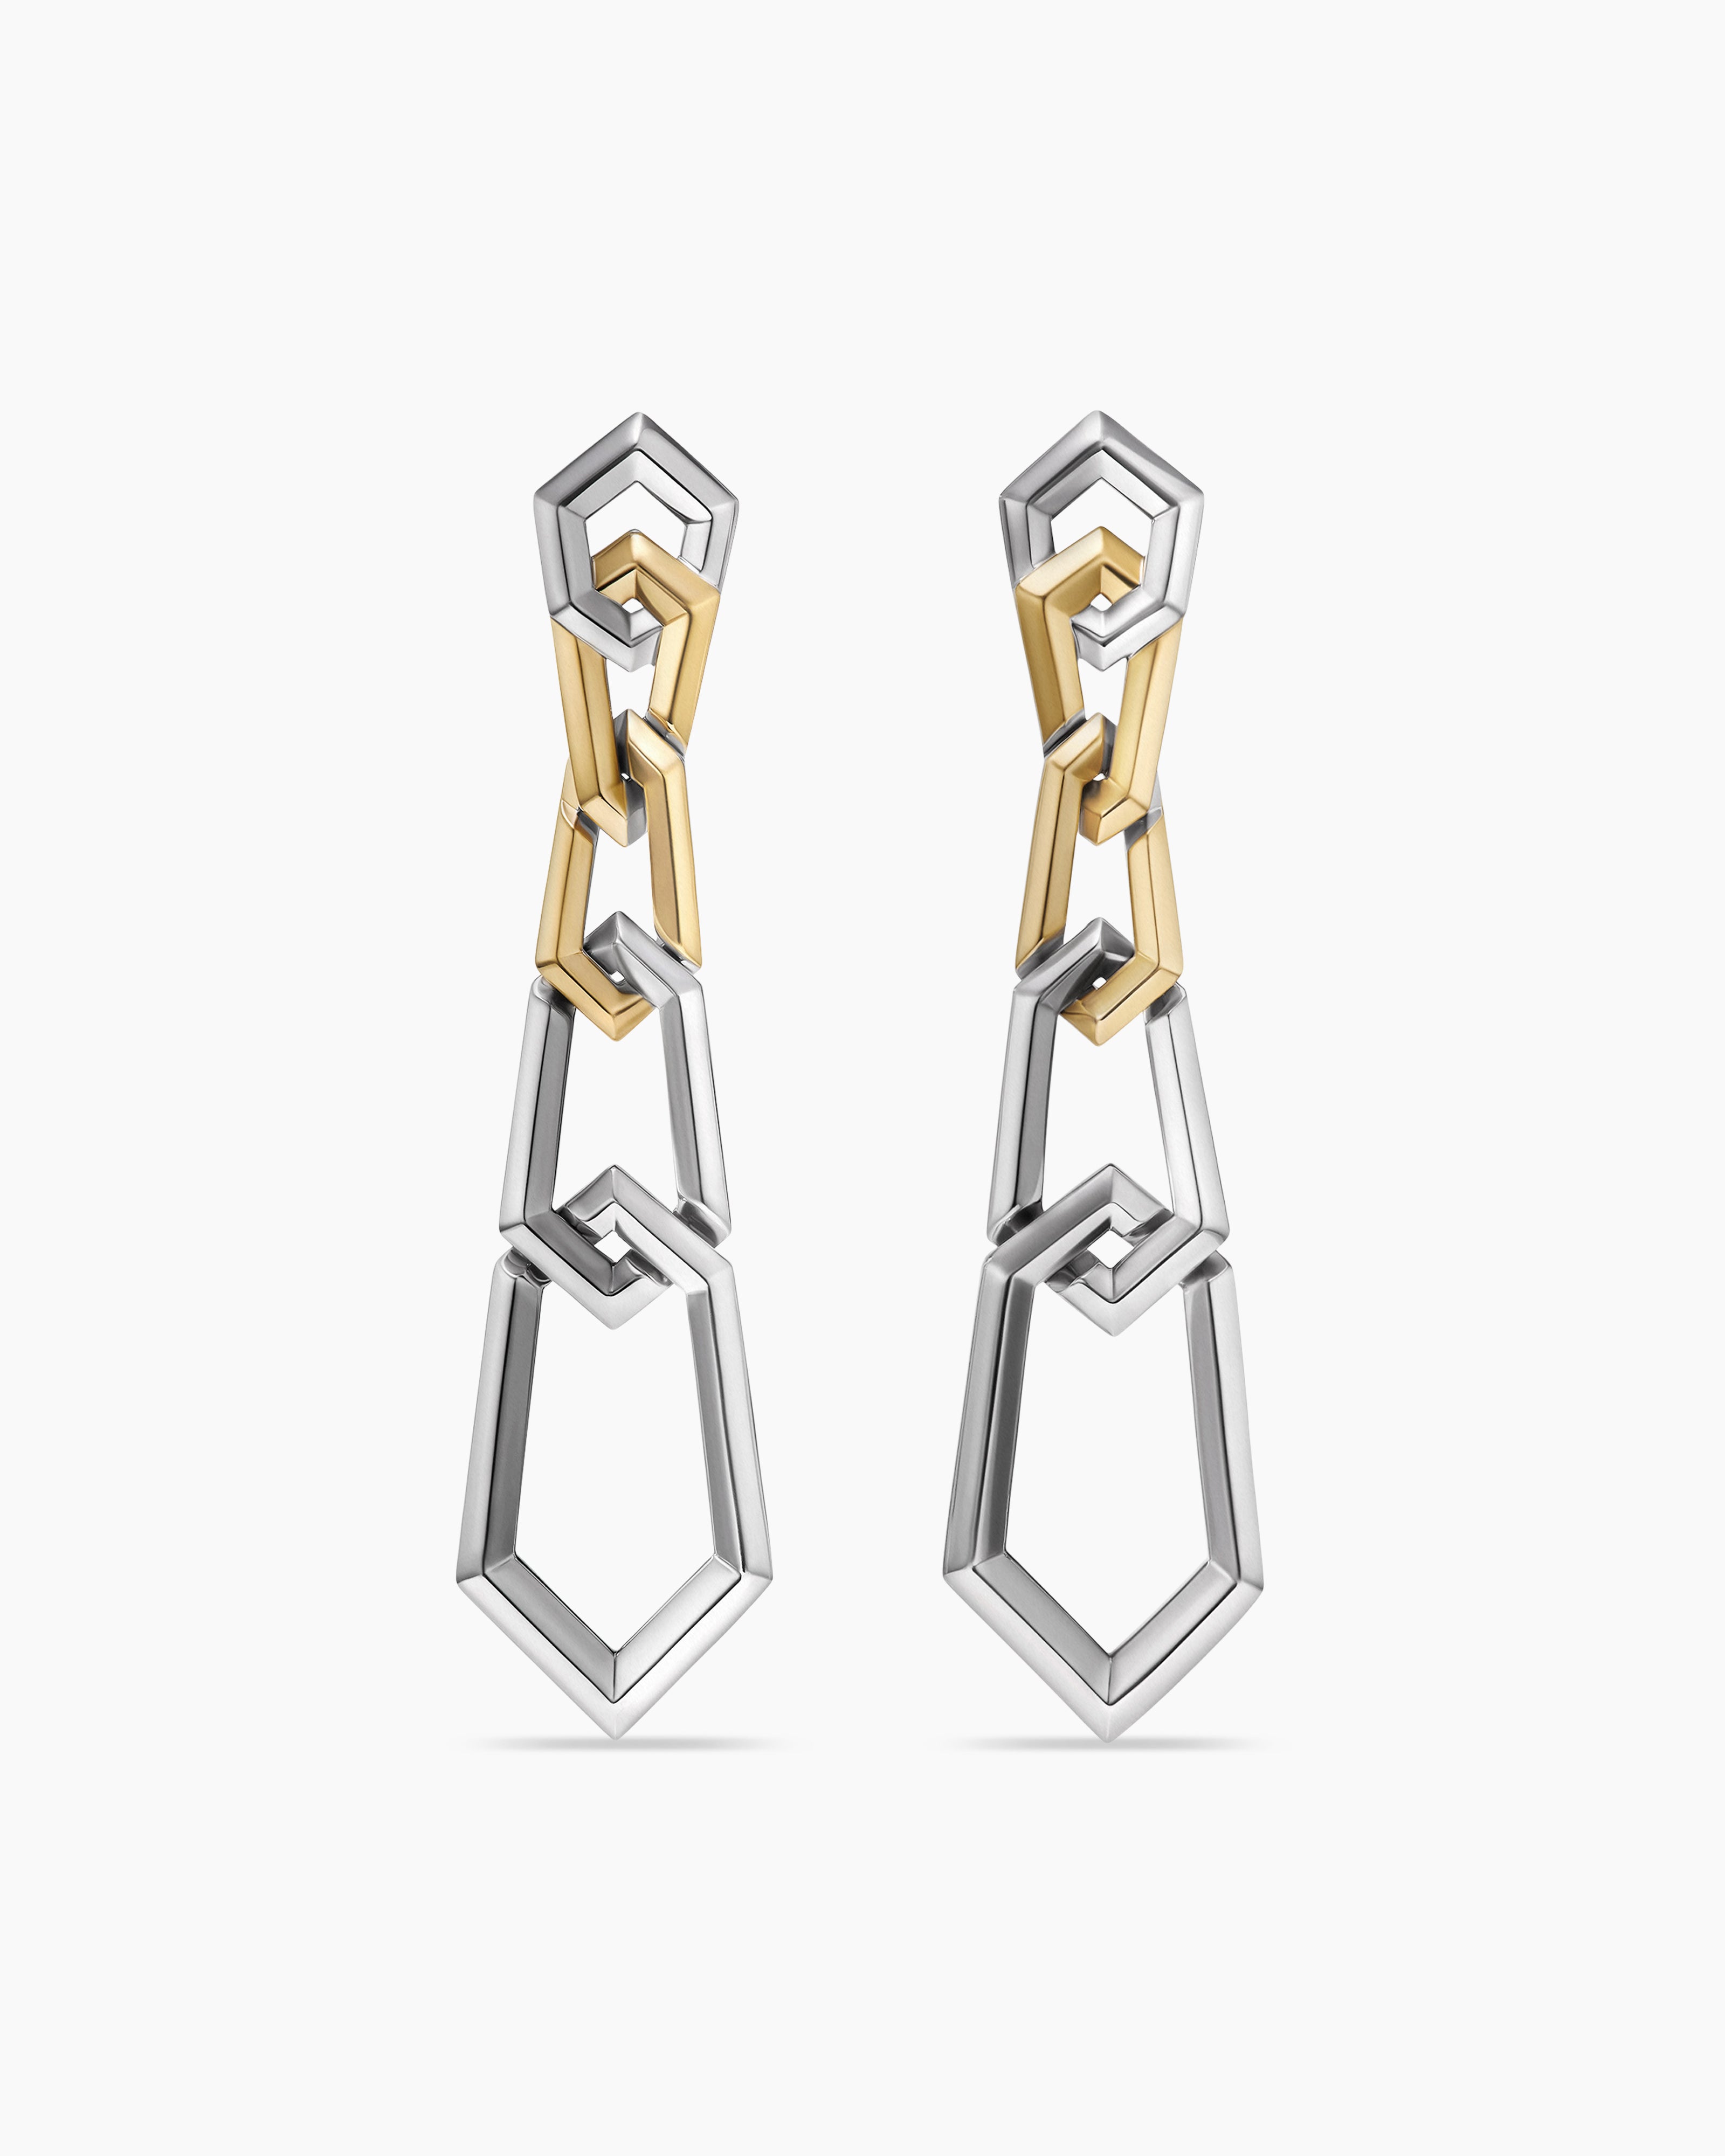 David Yurman Carlyle Linked Drop Earrings in Sterling Silver with 18K Yellow Gold